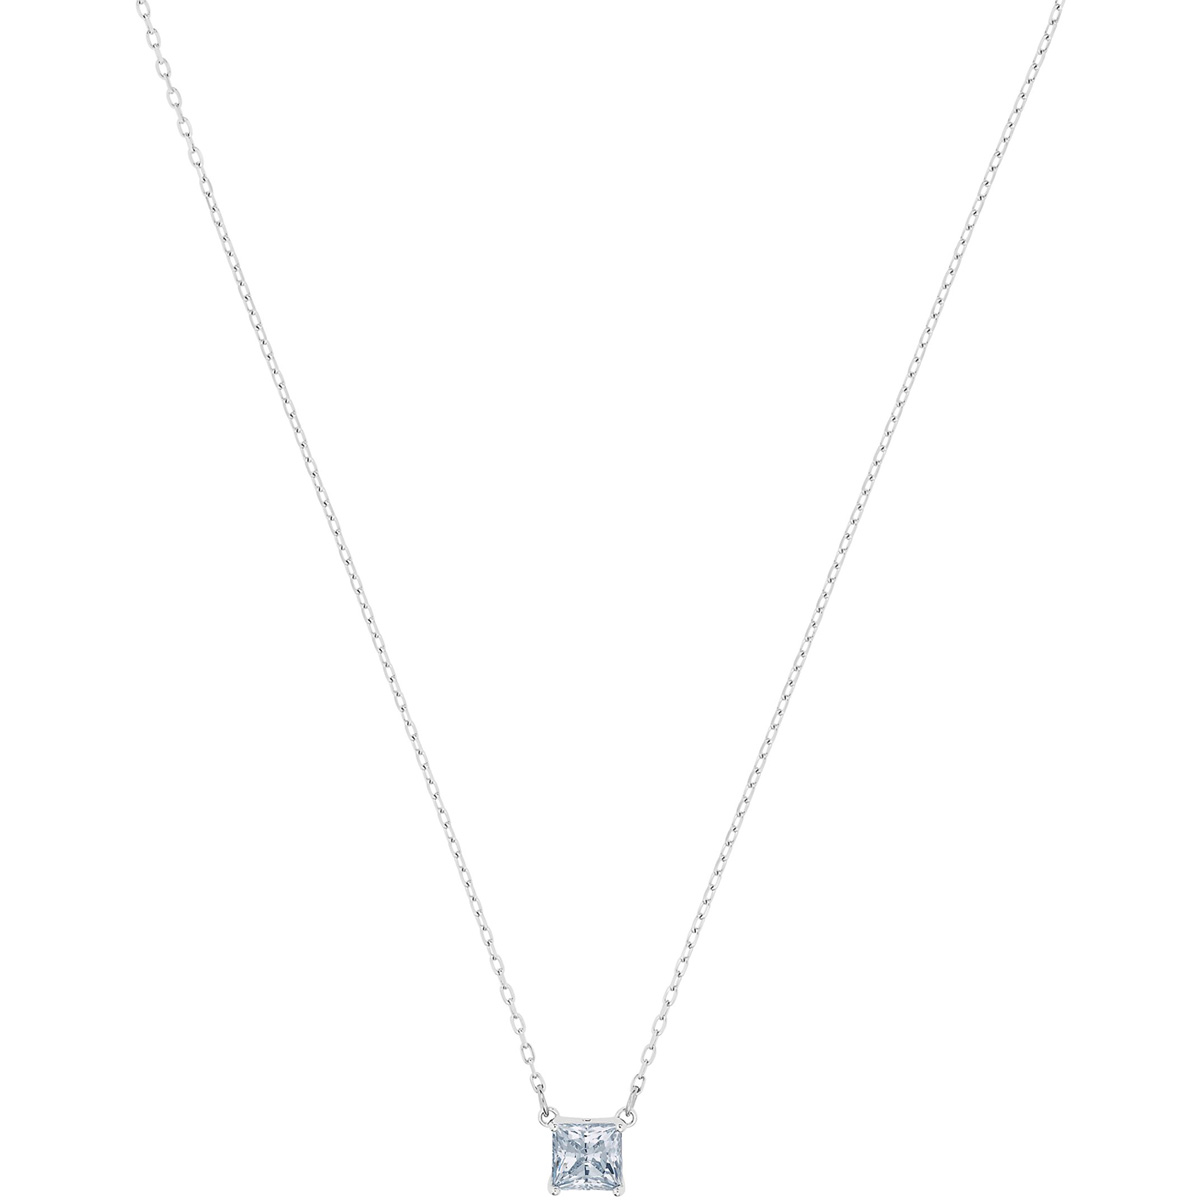 Photos - Pendant / Choker Necklace Swarovski Attract Necklace - White with Rhodium Plating 